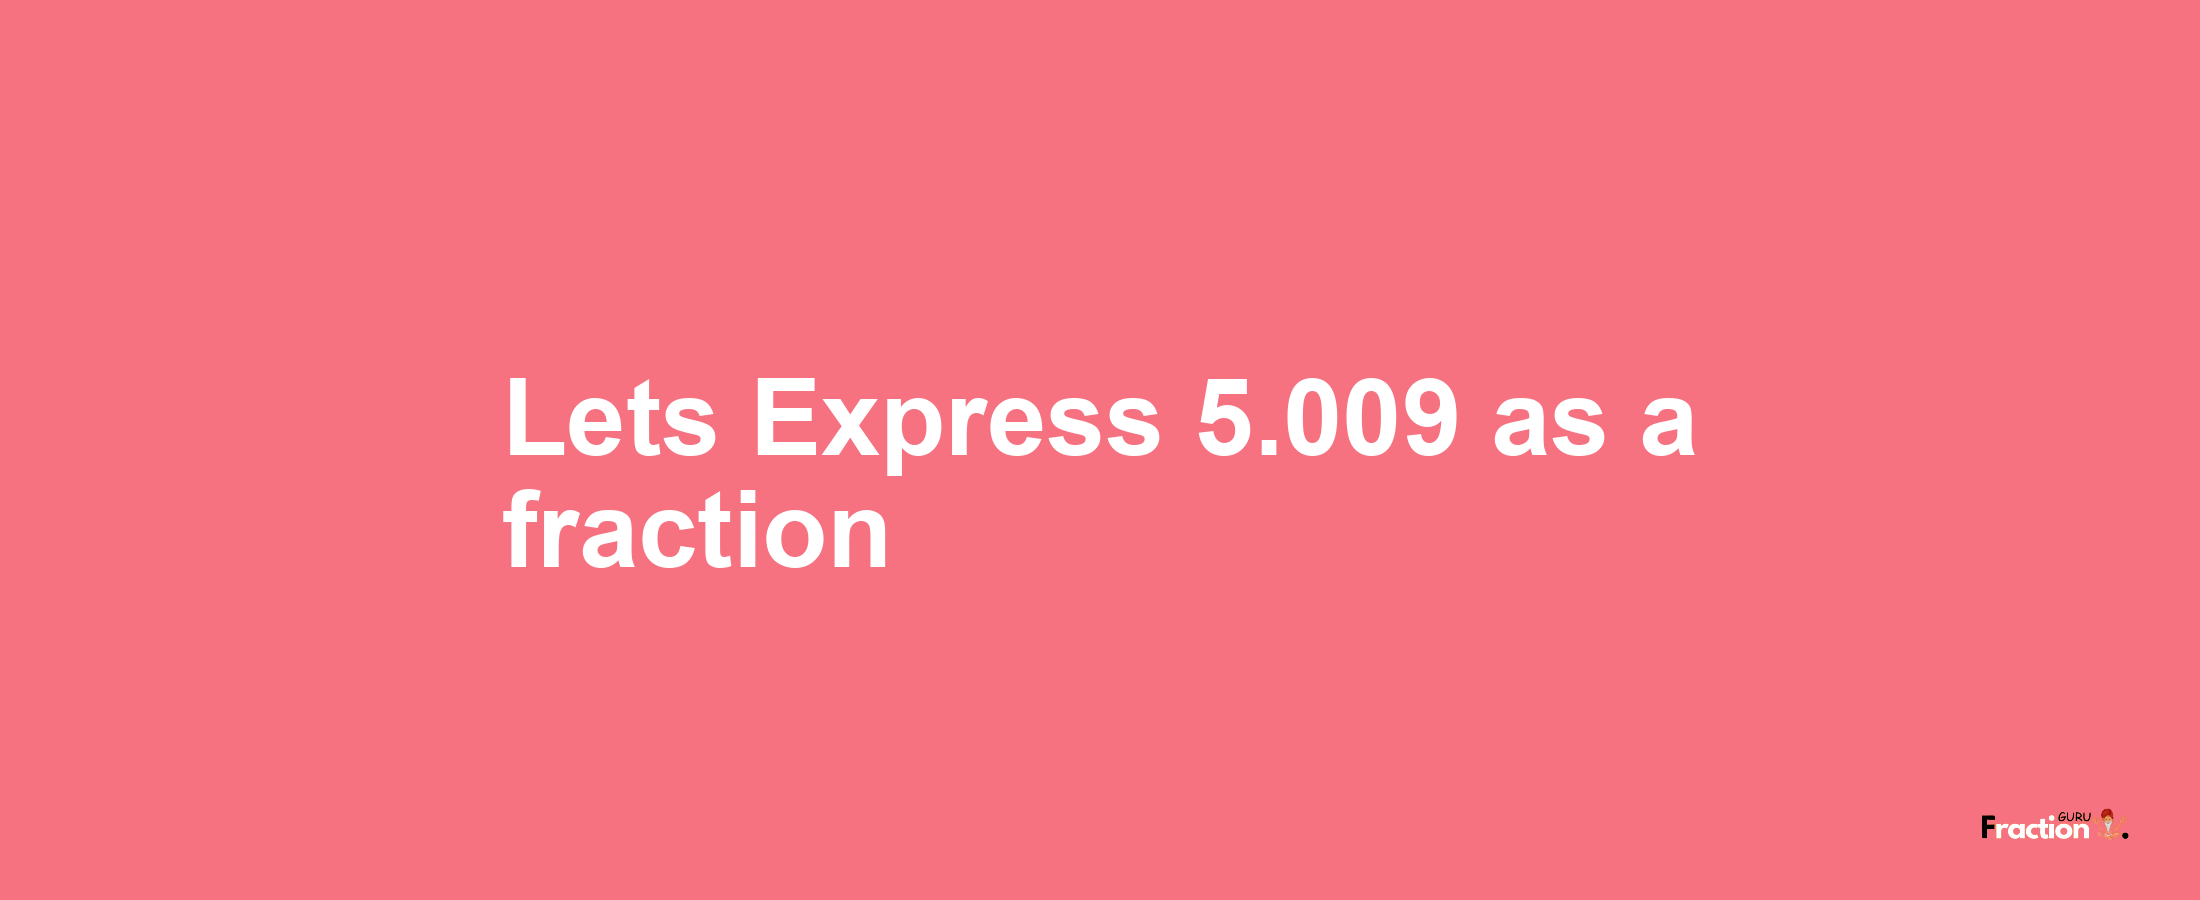 Lets Express 5.009 as afraction